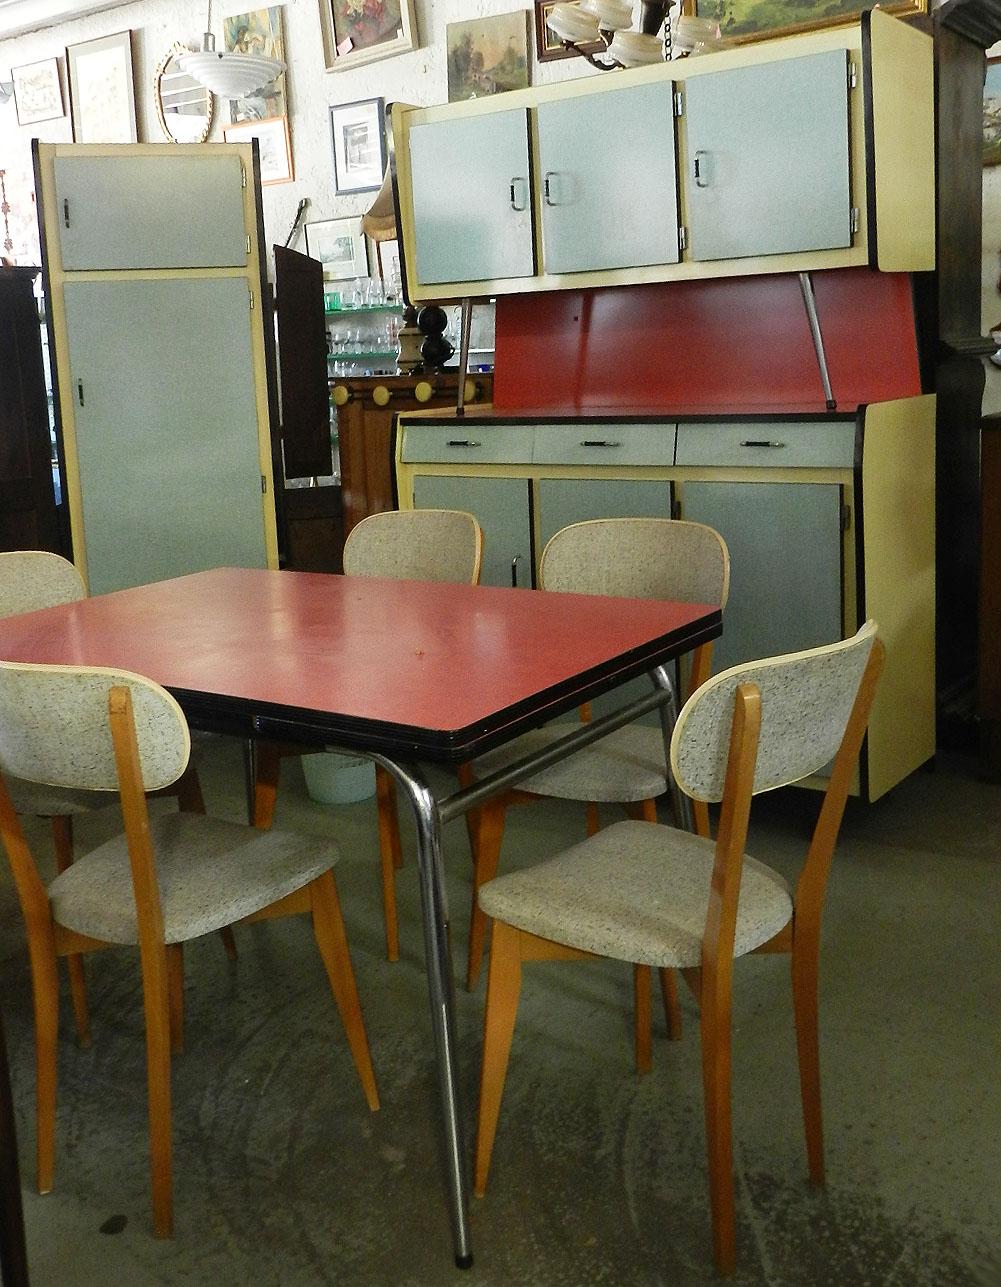 1950s kitchen cabinets for sale